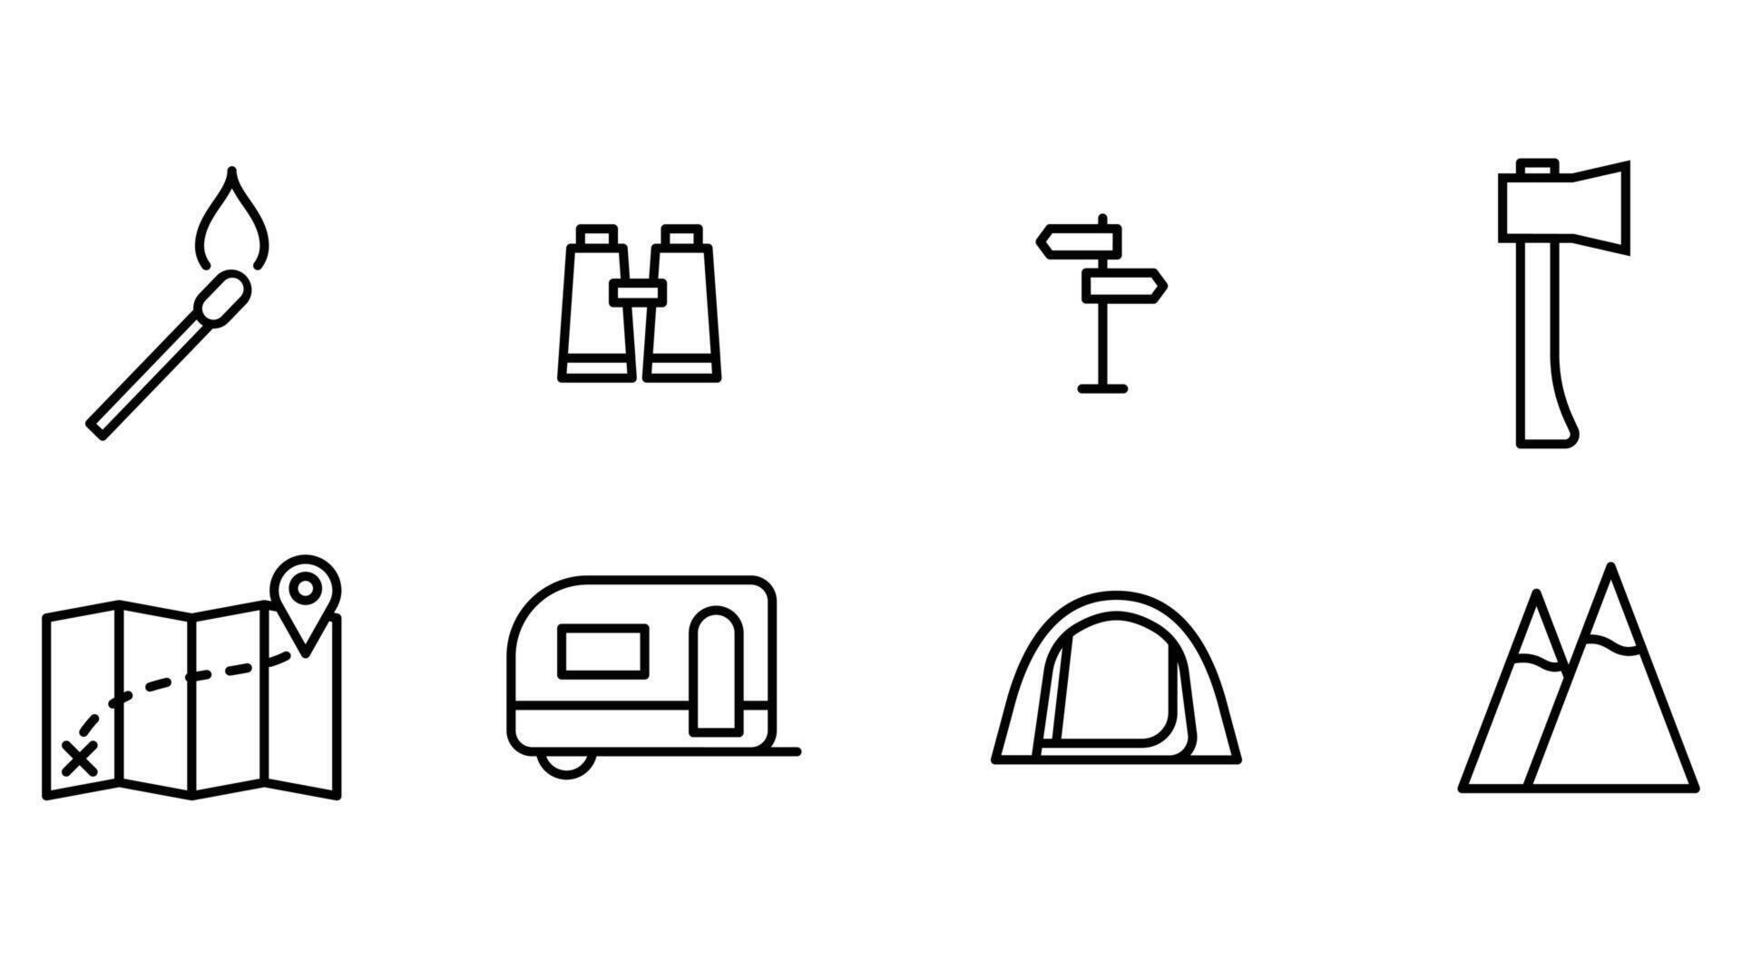 Camping tools and camp site elements vector illustration